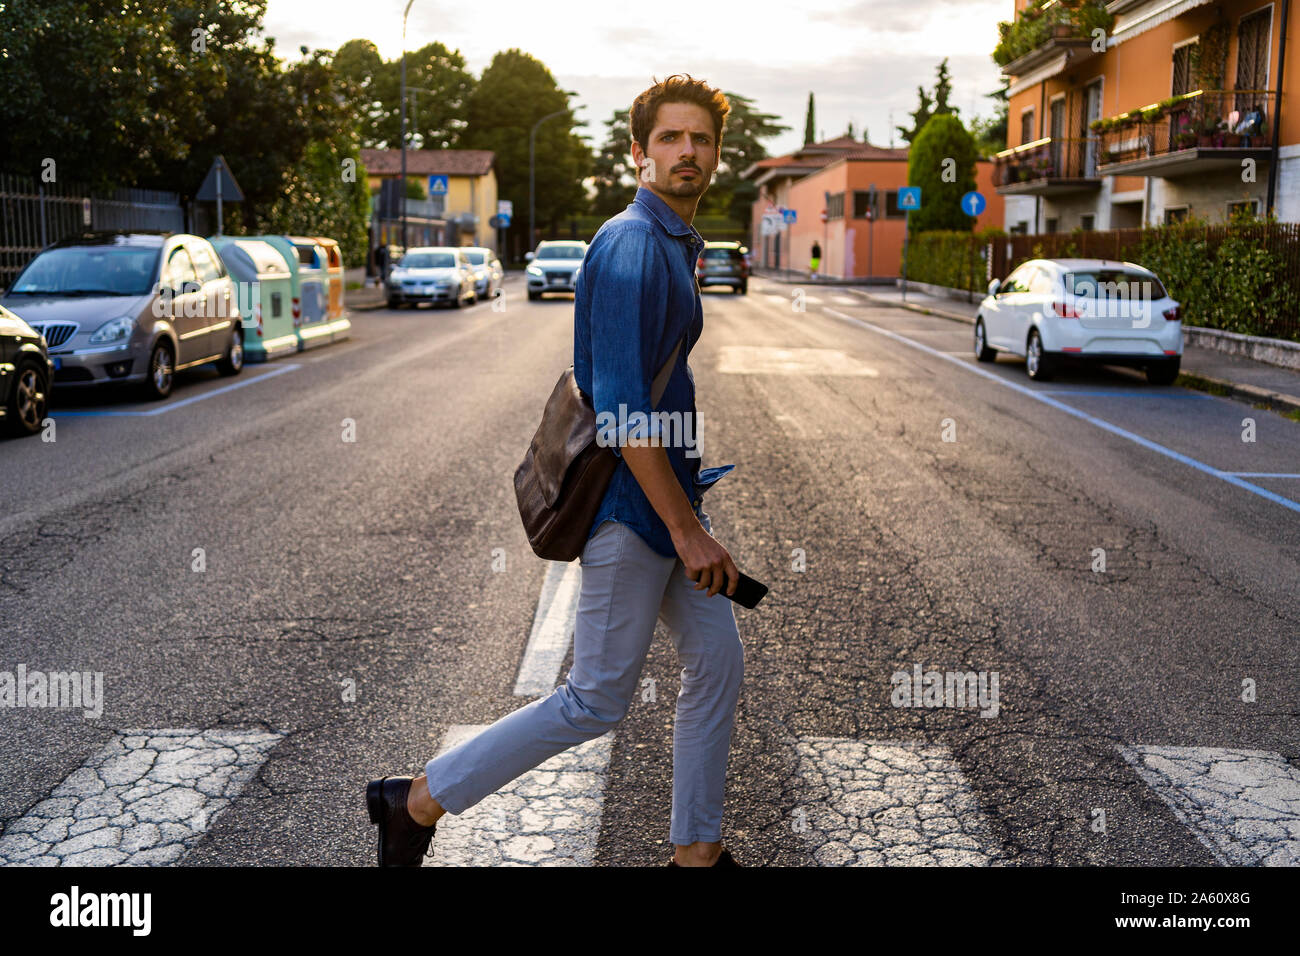 Man crossing street in the city Stock Photo